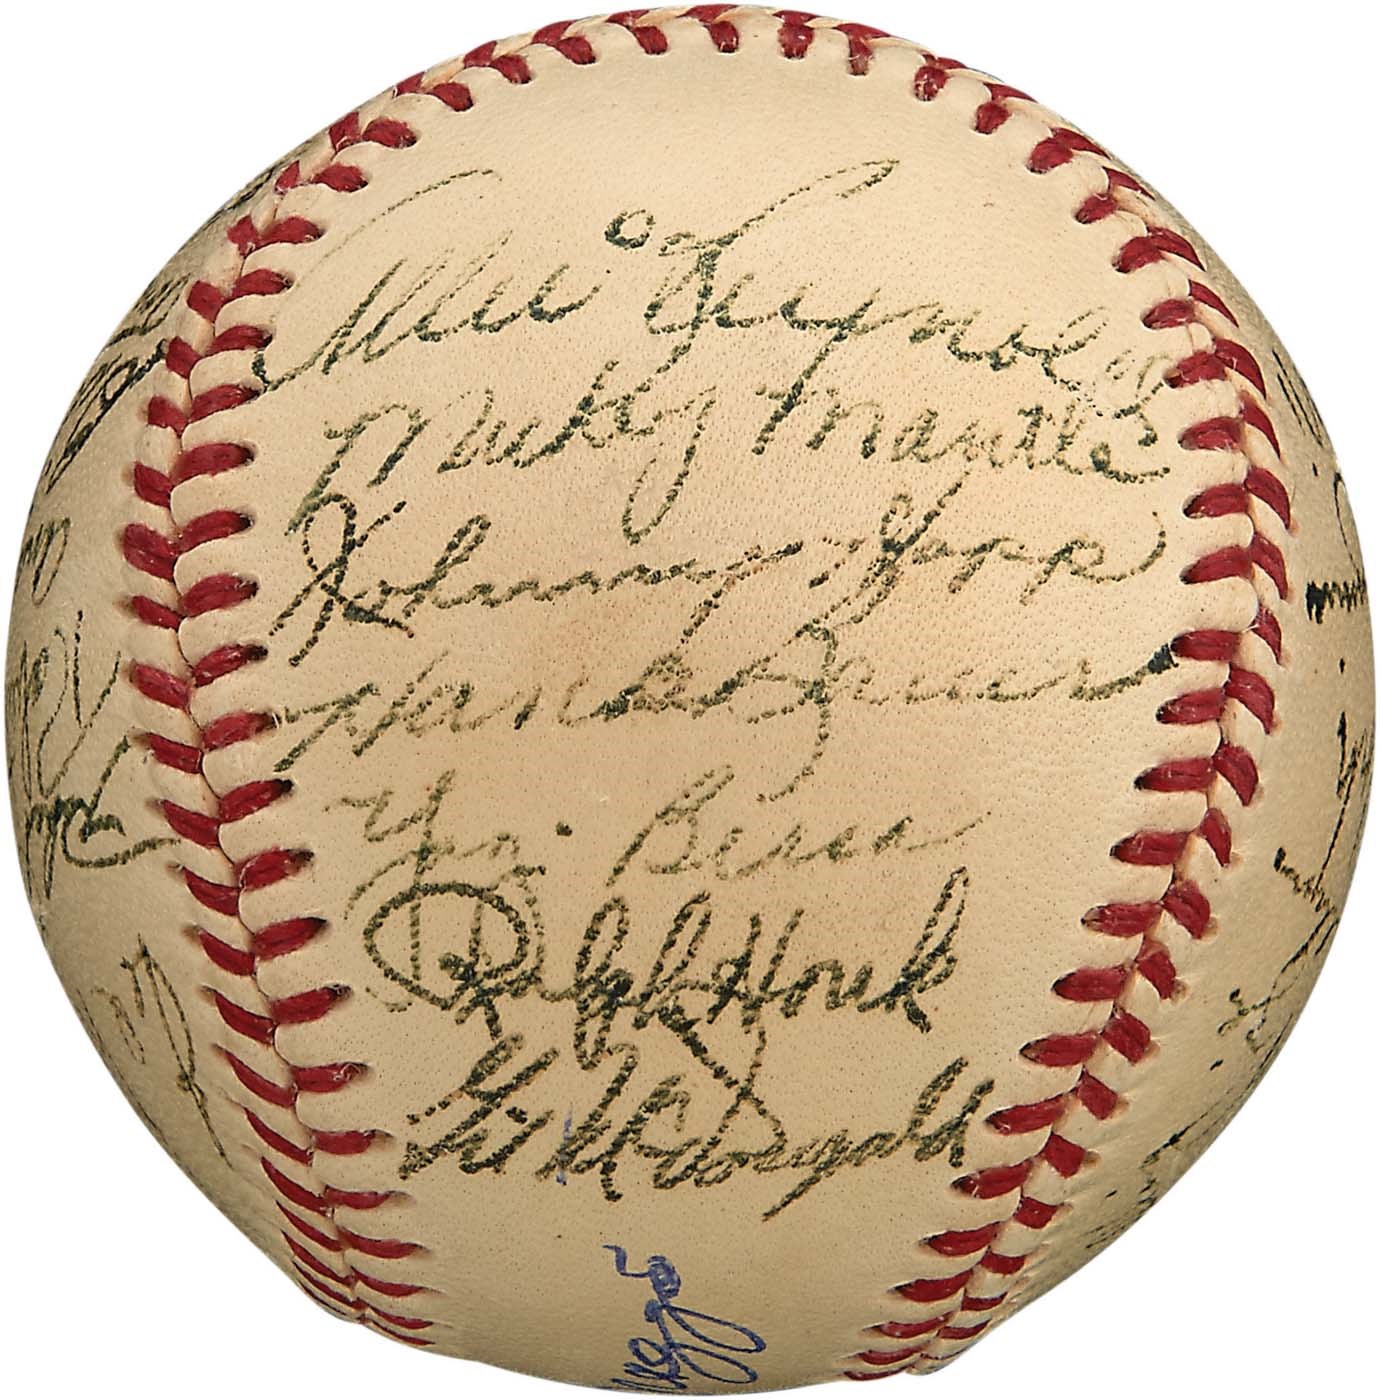 NY Yankees, Giants & Mets - 1951 World Series Champion Yankees Team-Signed Baseball w/Rookie Mantle (PSA)